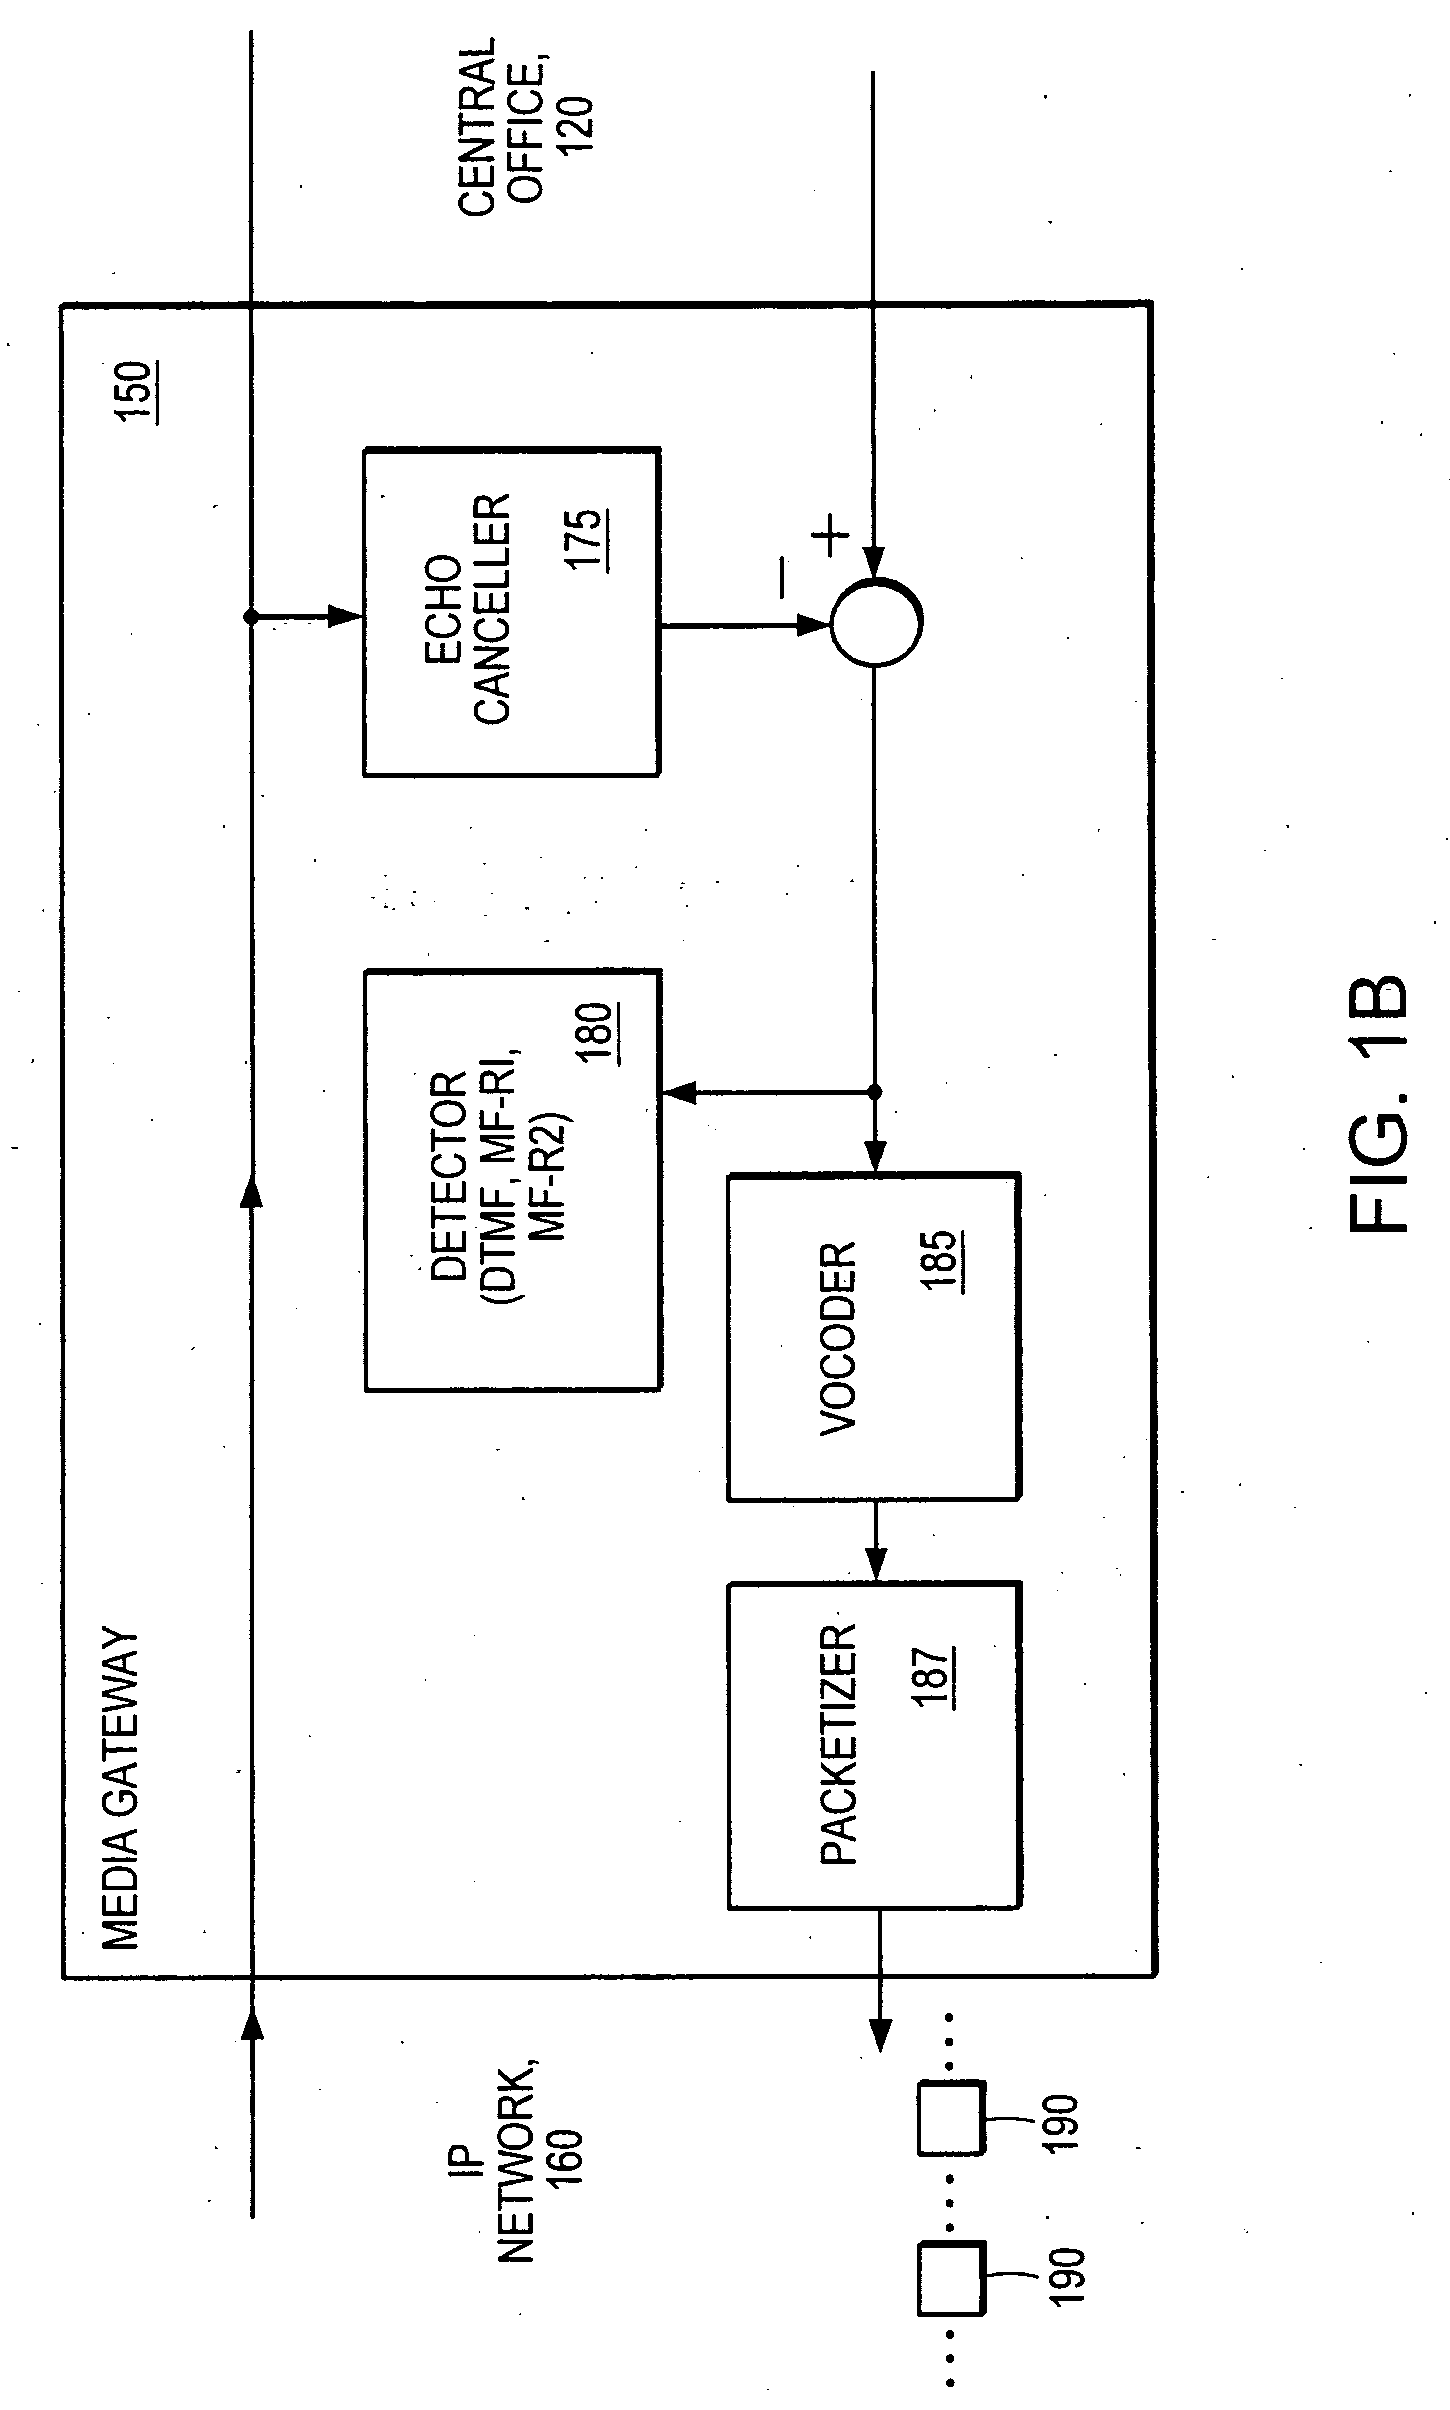 Method and apparatus for performing high-density DTMF, MF-R1, MF-R2 detection